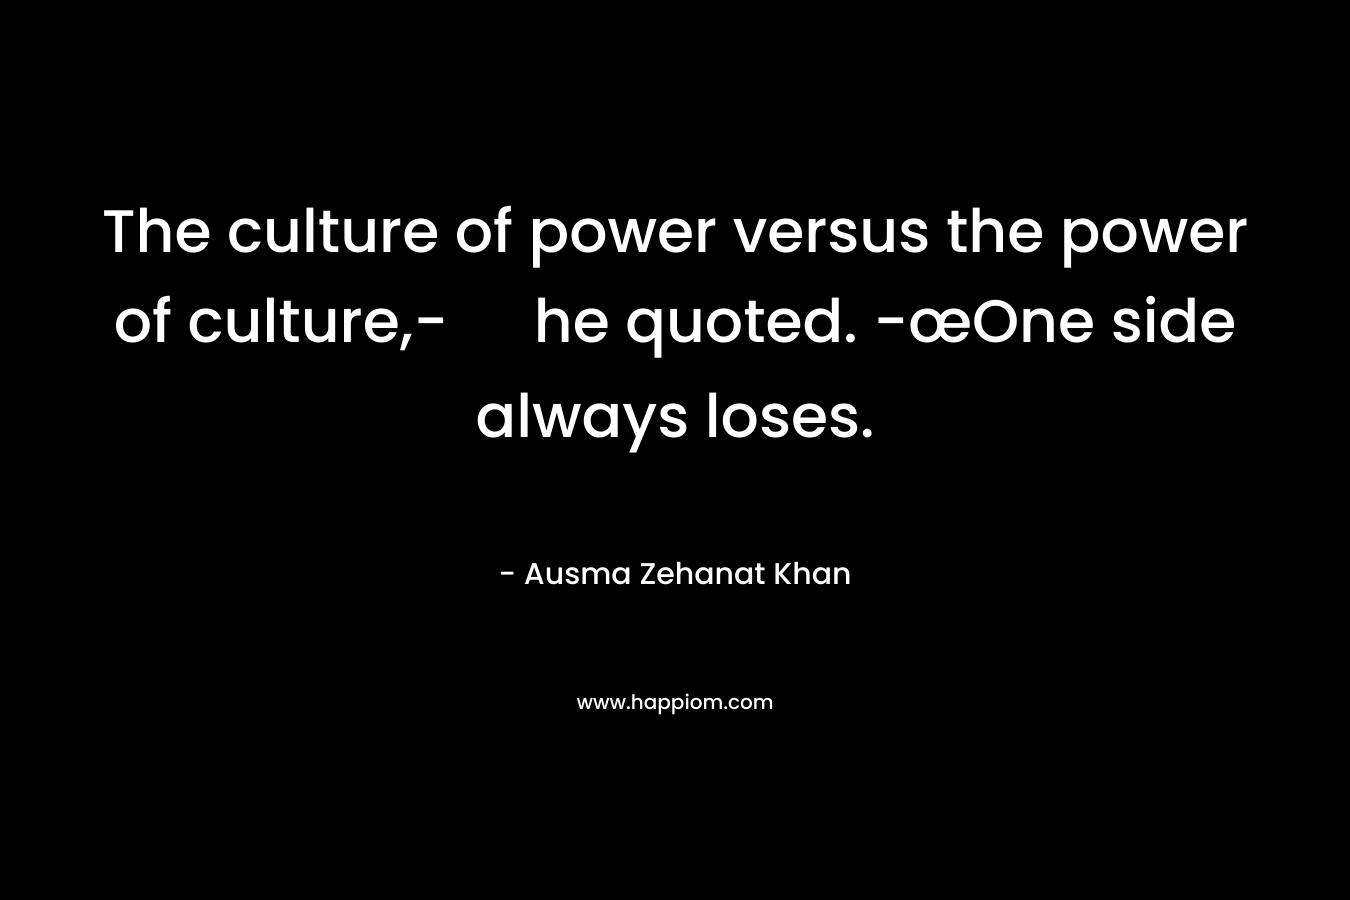 The culture of power versus the power of culture,- he quoted. -œOne side always loses.